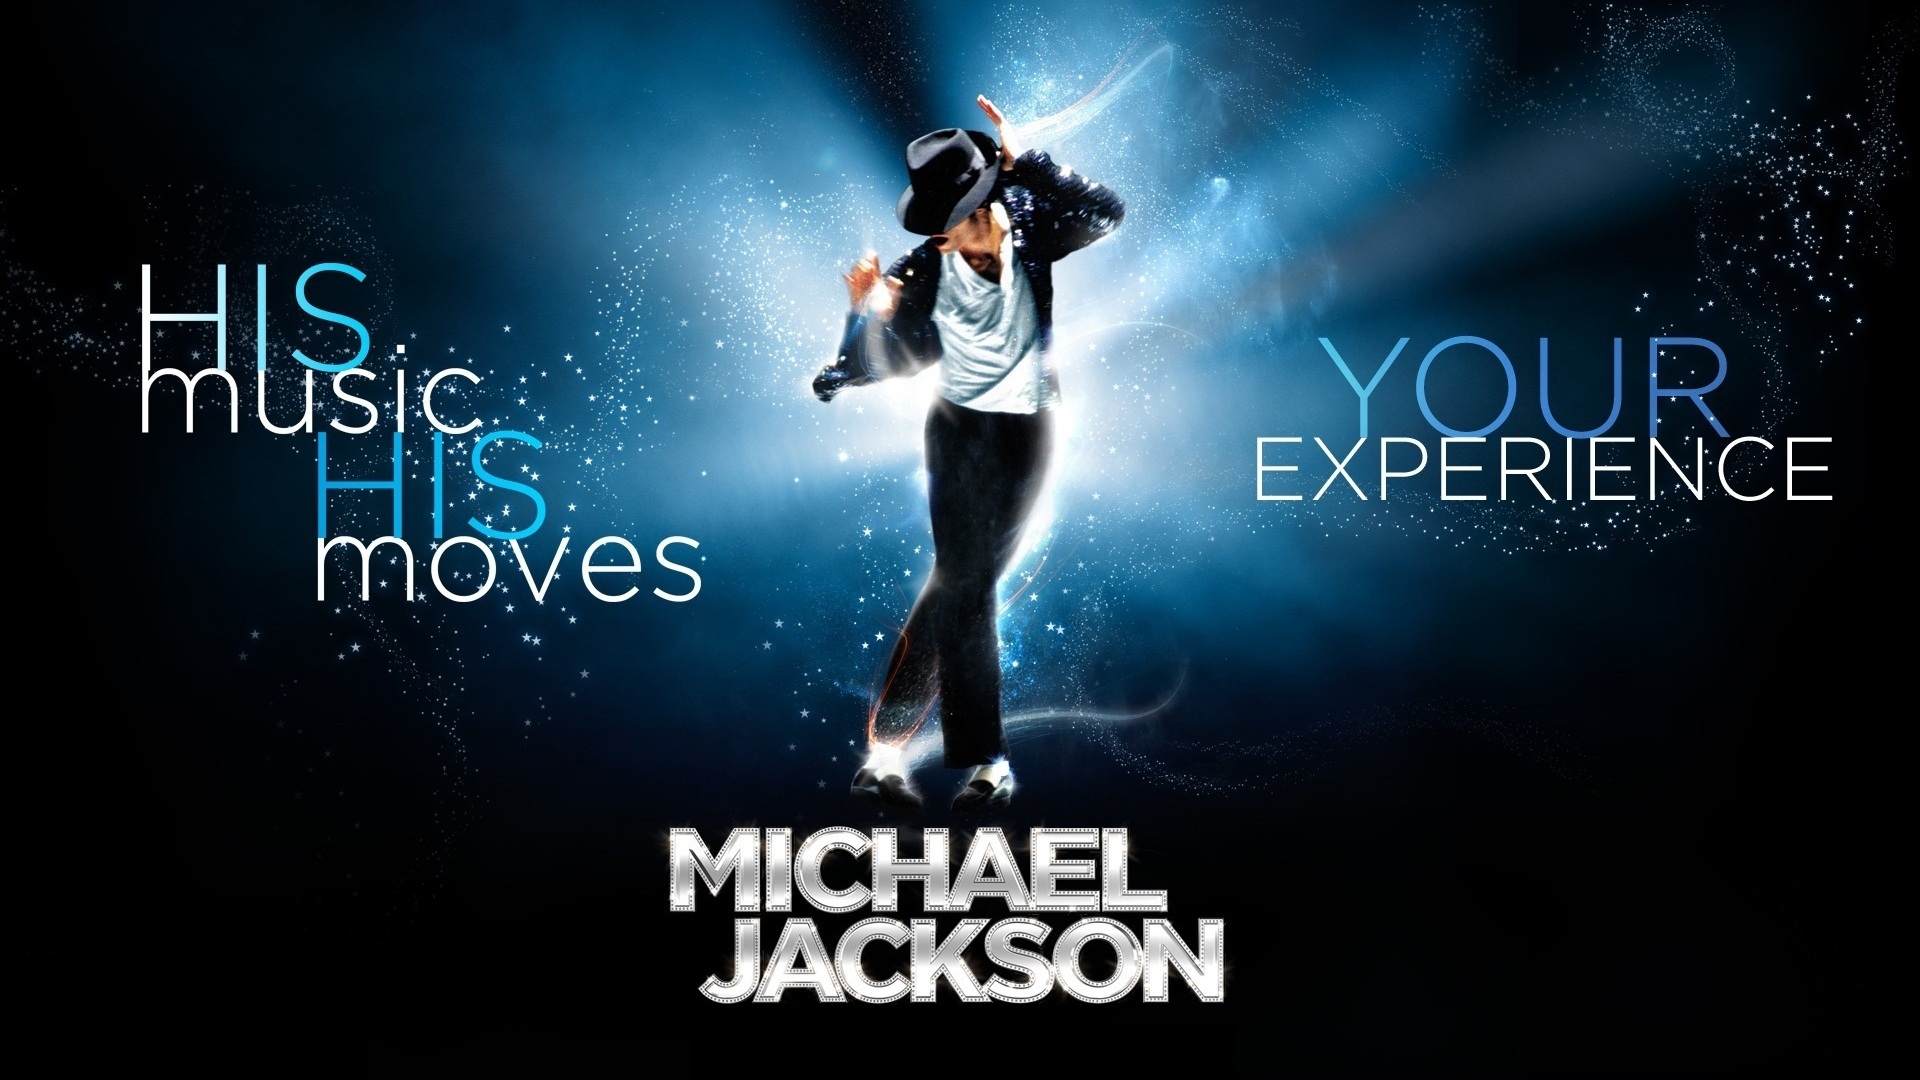 Michael Jackson Experience for 1920 x 1080 HDTV 1080p resolution